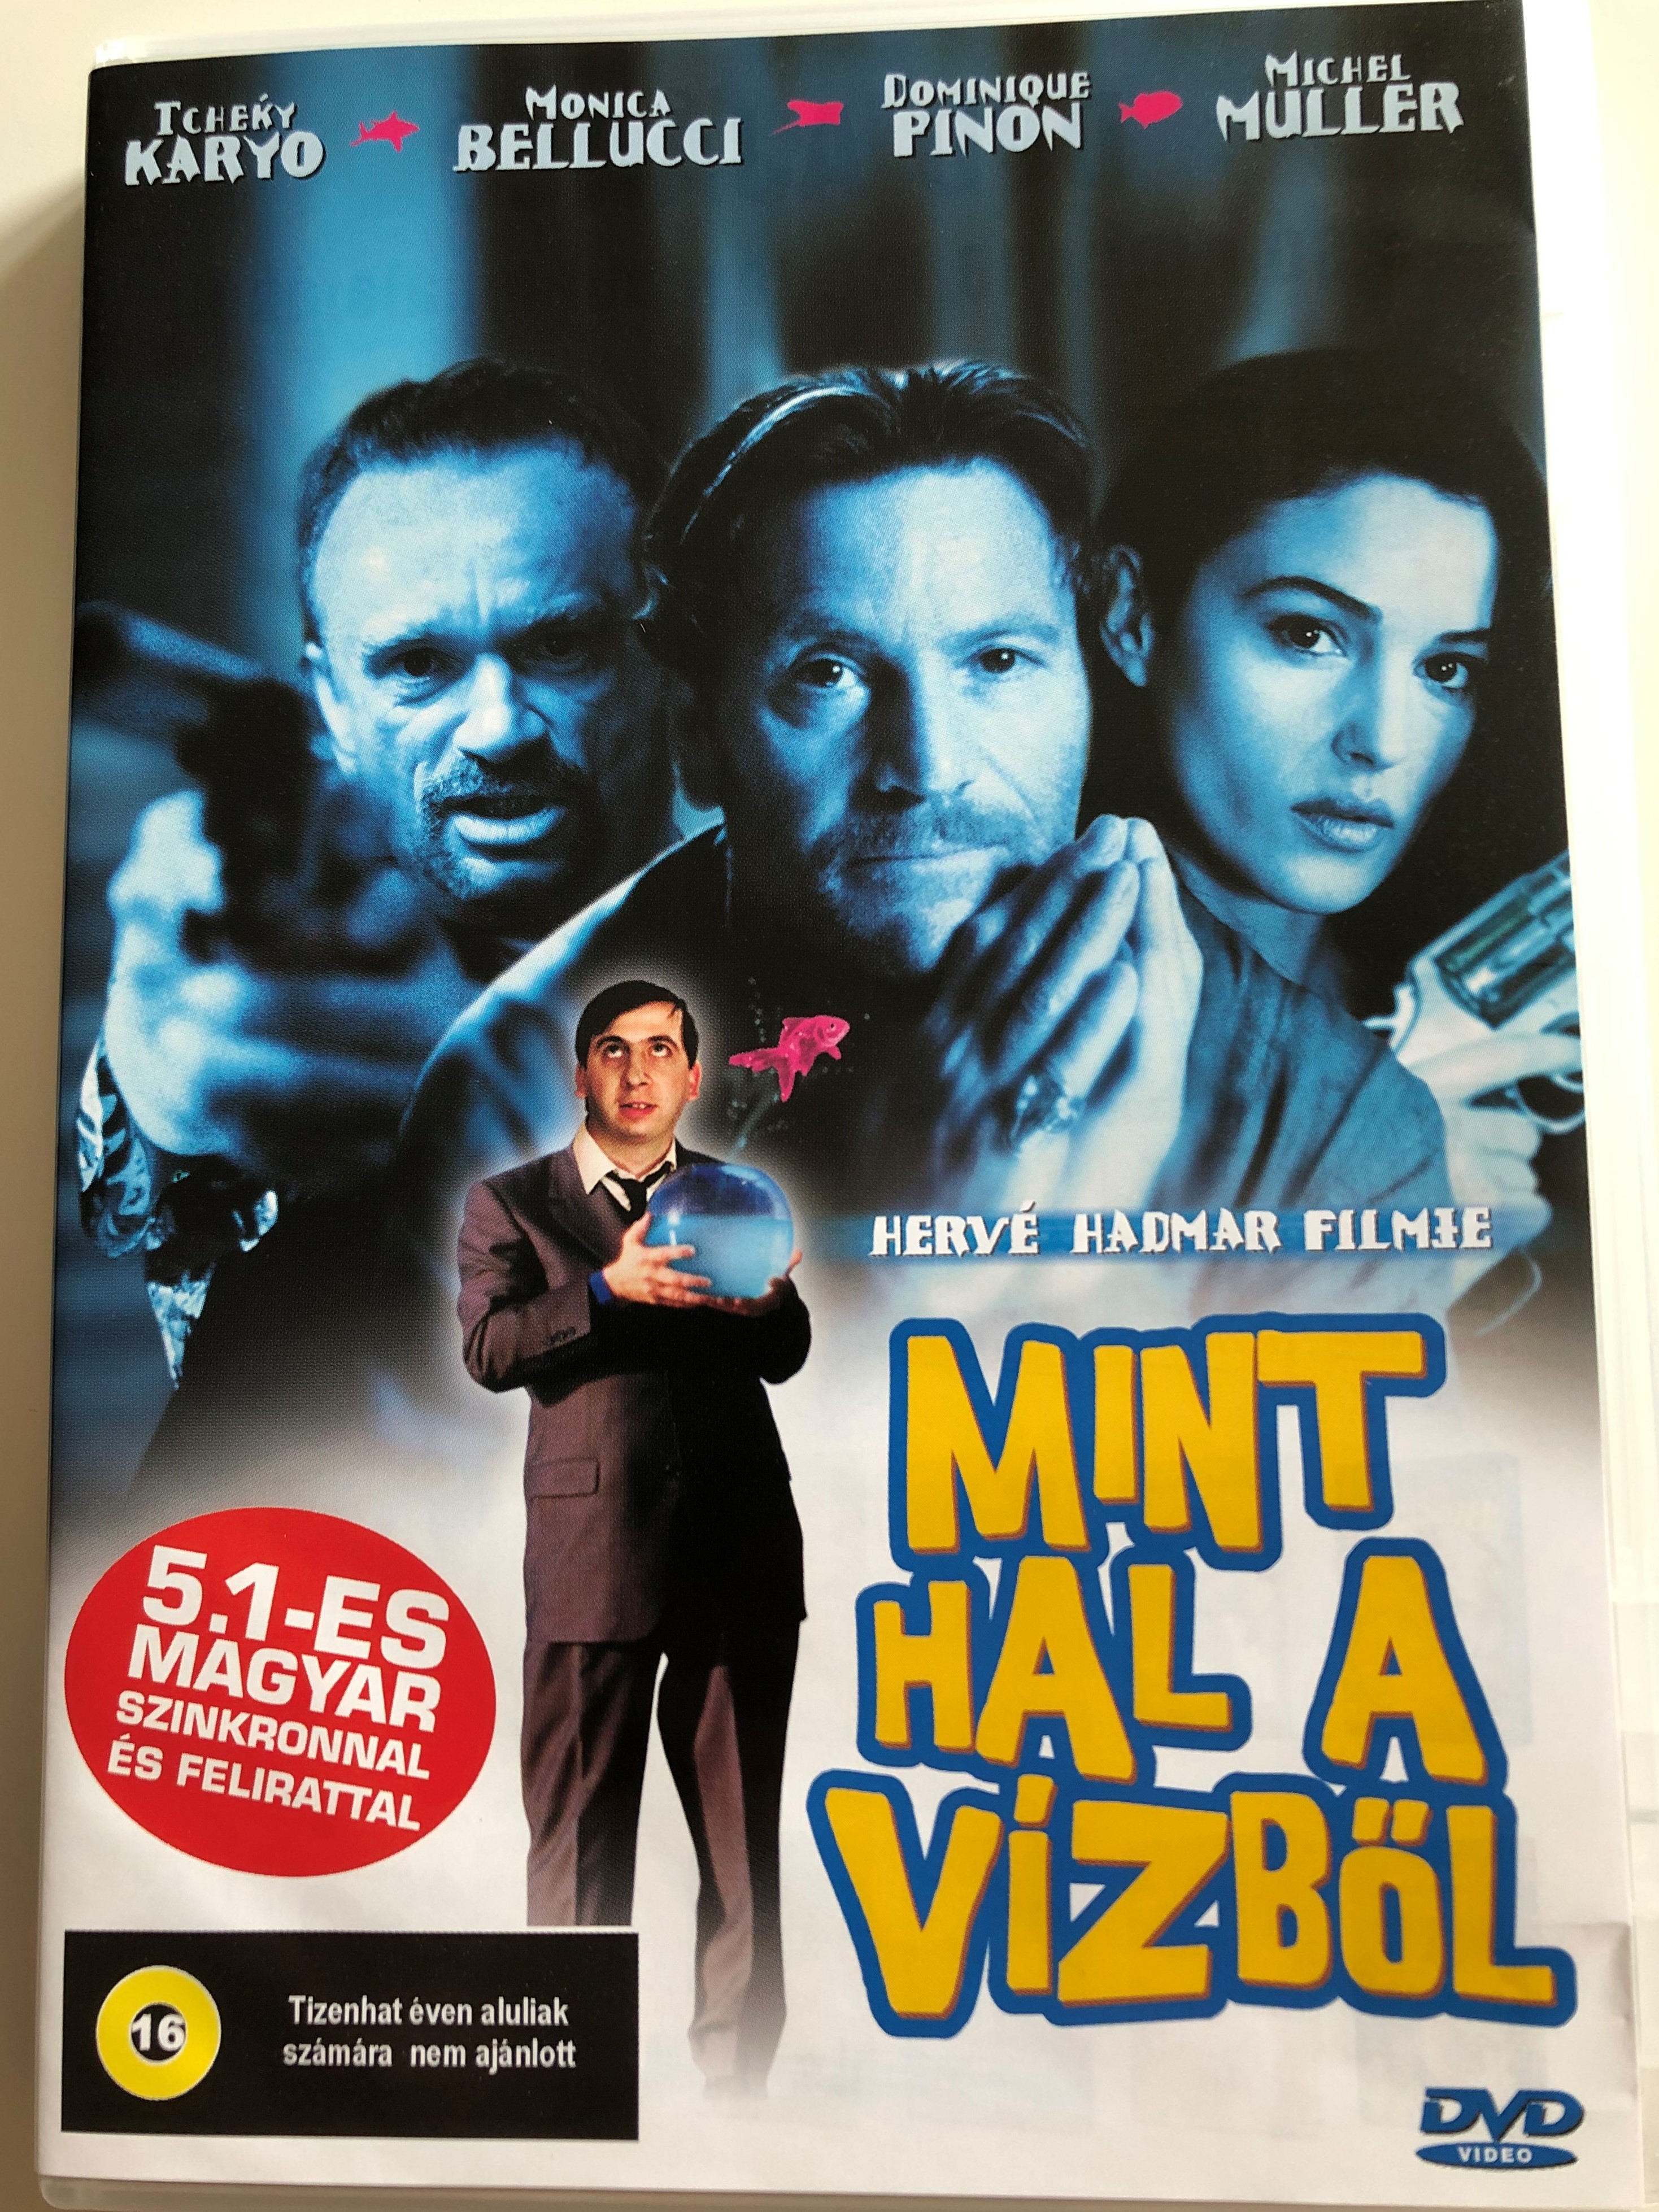 comme-un-poisson-hors-de-l-eau-like-fish-out-of-water-dvd-1999-mint-hal-a-v-zb-l-directed-by-herv-hadmar-starring-monica-bellucci-dominique-pinon-michel-muller-tch-ky-karyo-1-.jpg